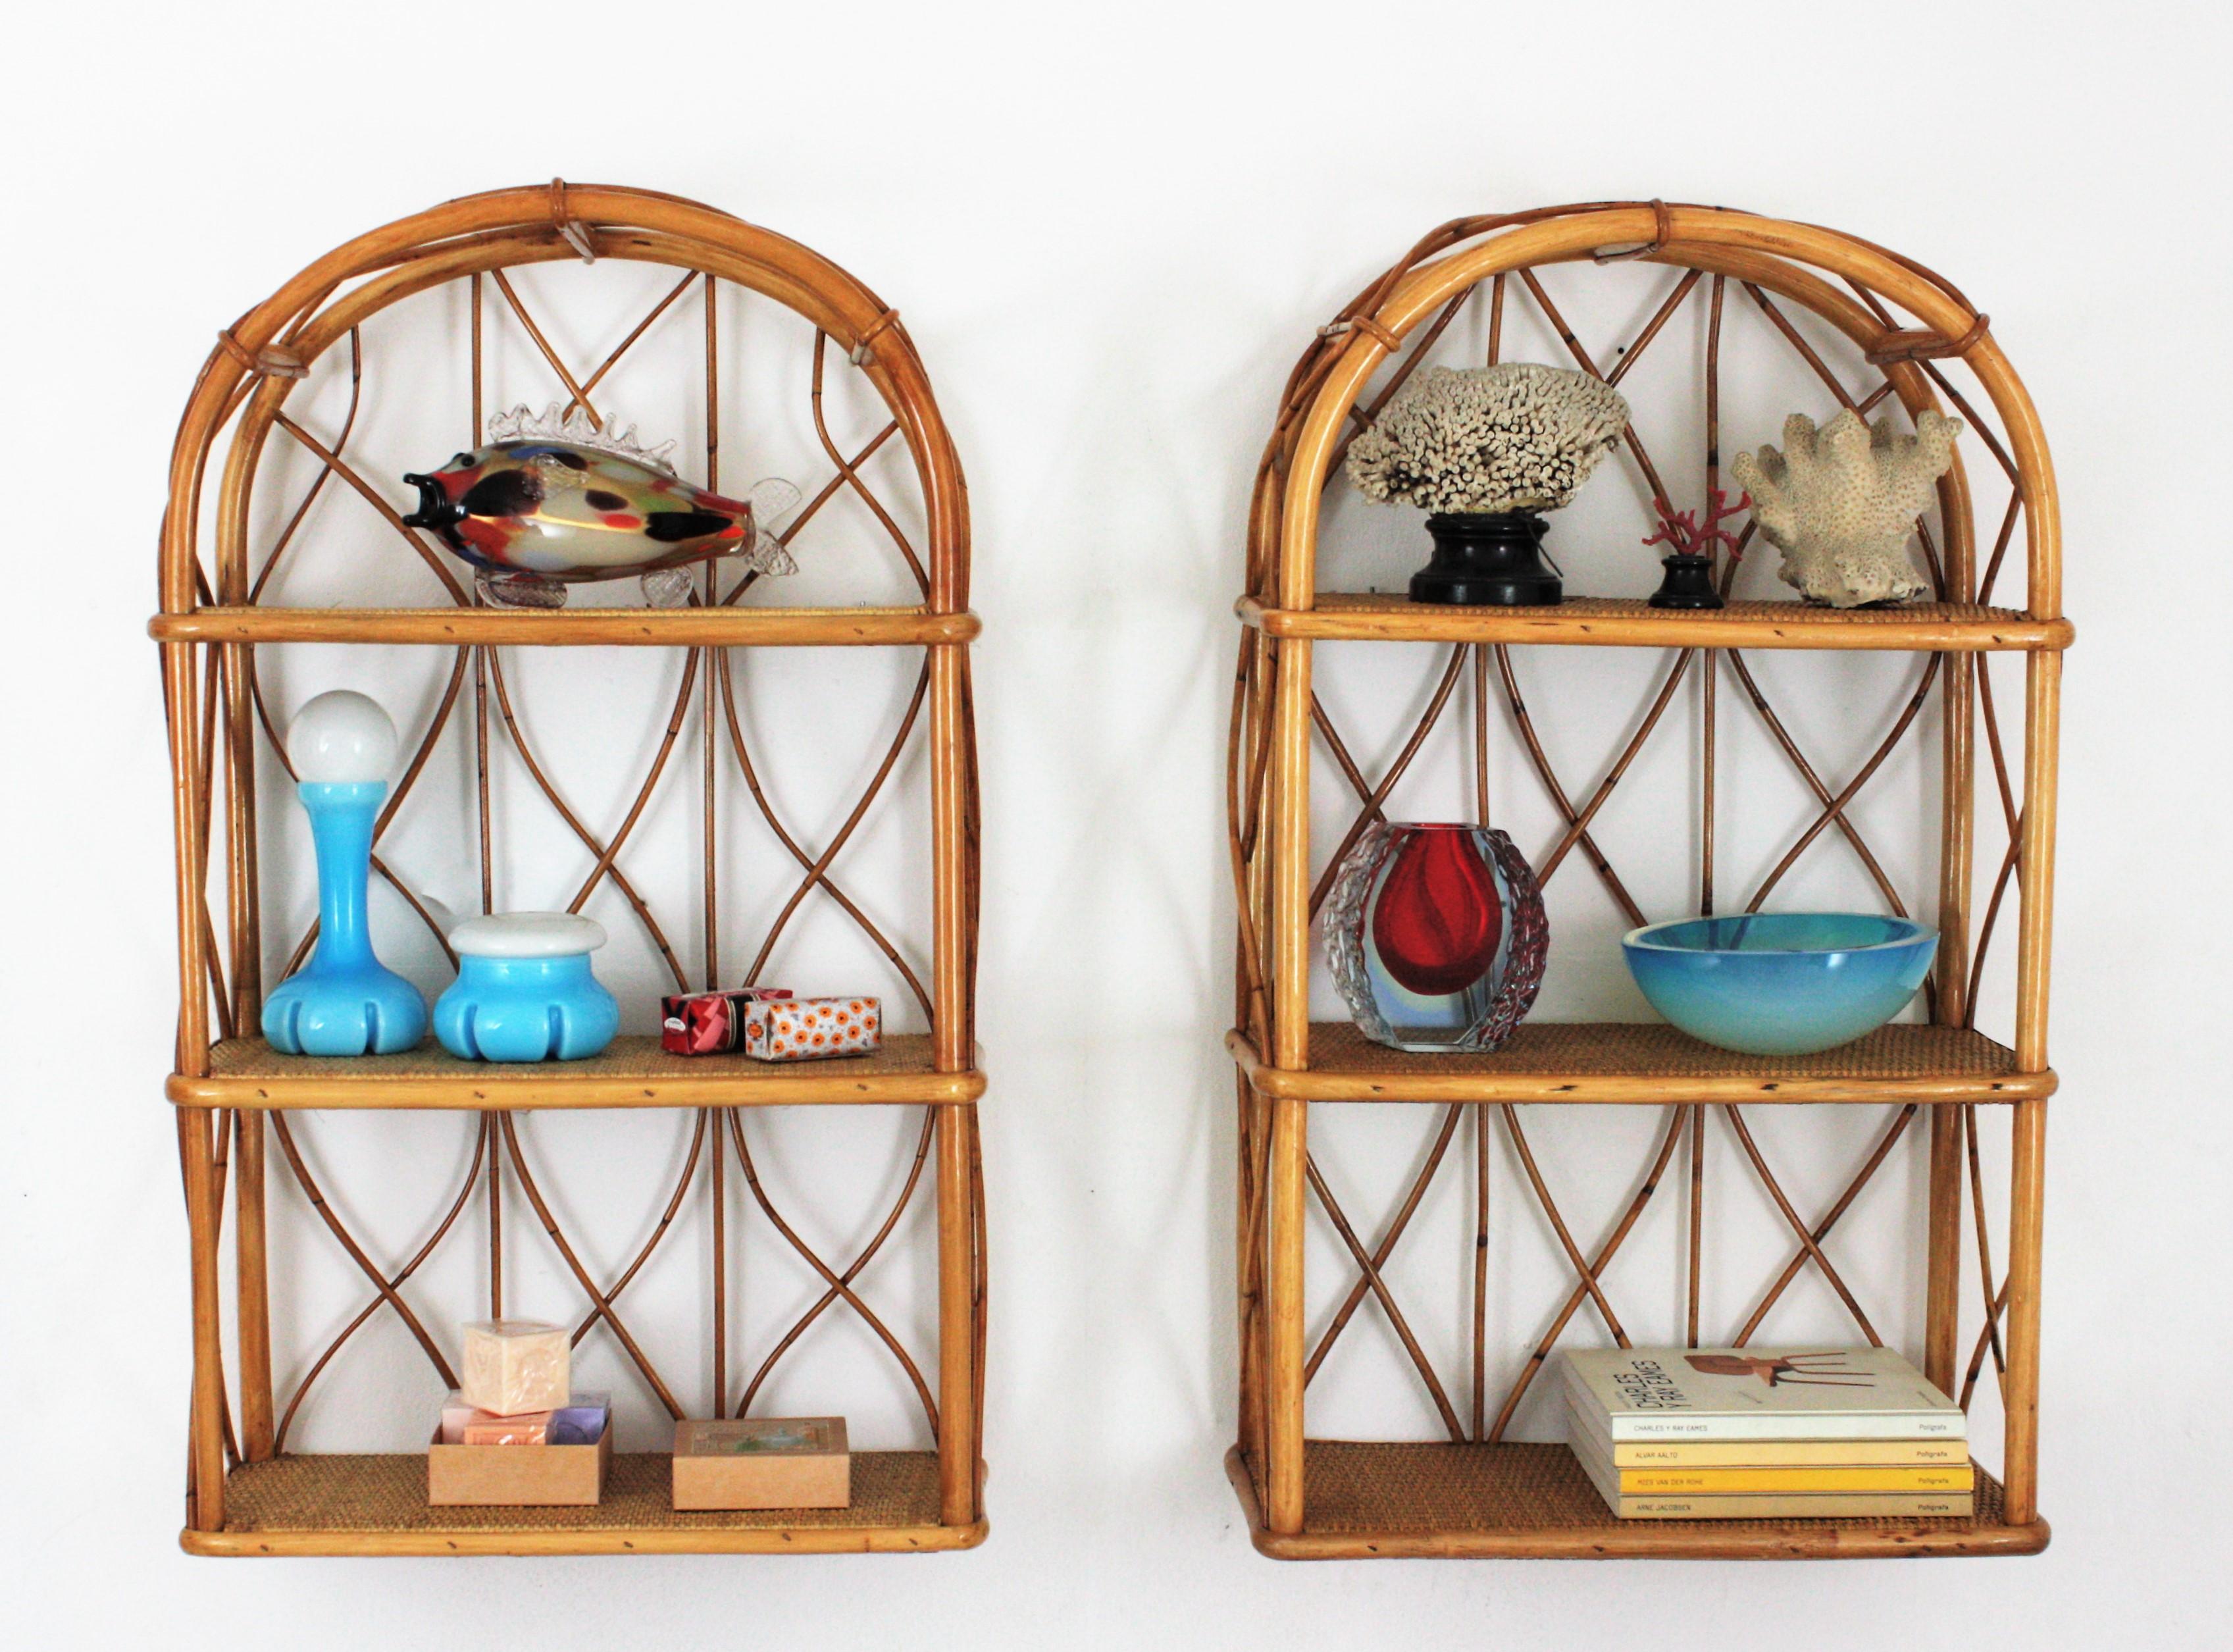 Eye-catching pair of wall hanging shelves or stands in bamboo and rattan, Spain, 1960s.
Each one of these étagères have 3 shelves covered with rattan wire. The structures are made in bamboo with rattan decorative accents at both sides and at the